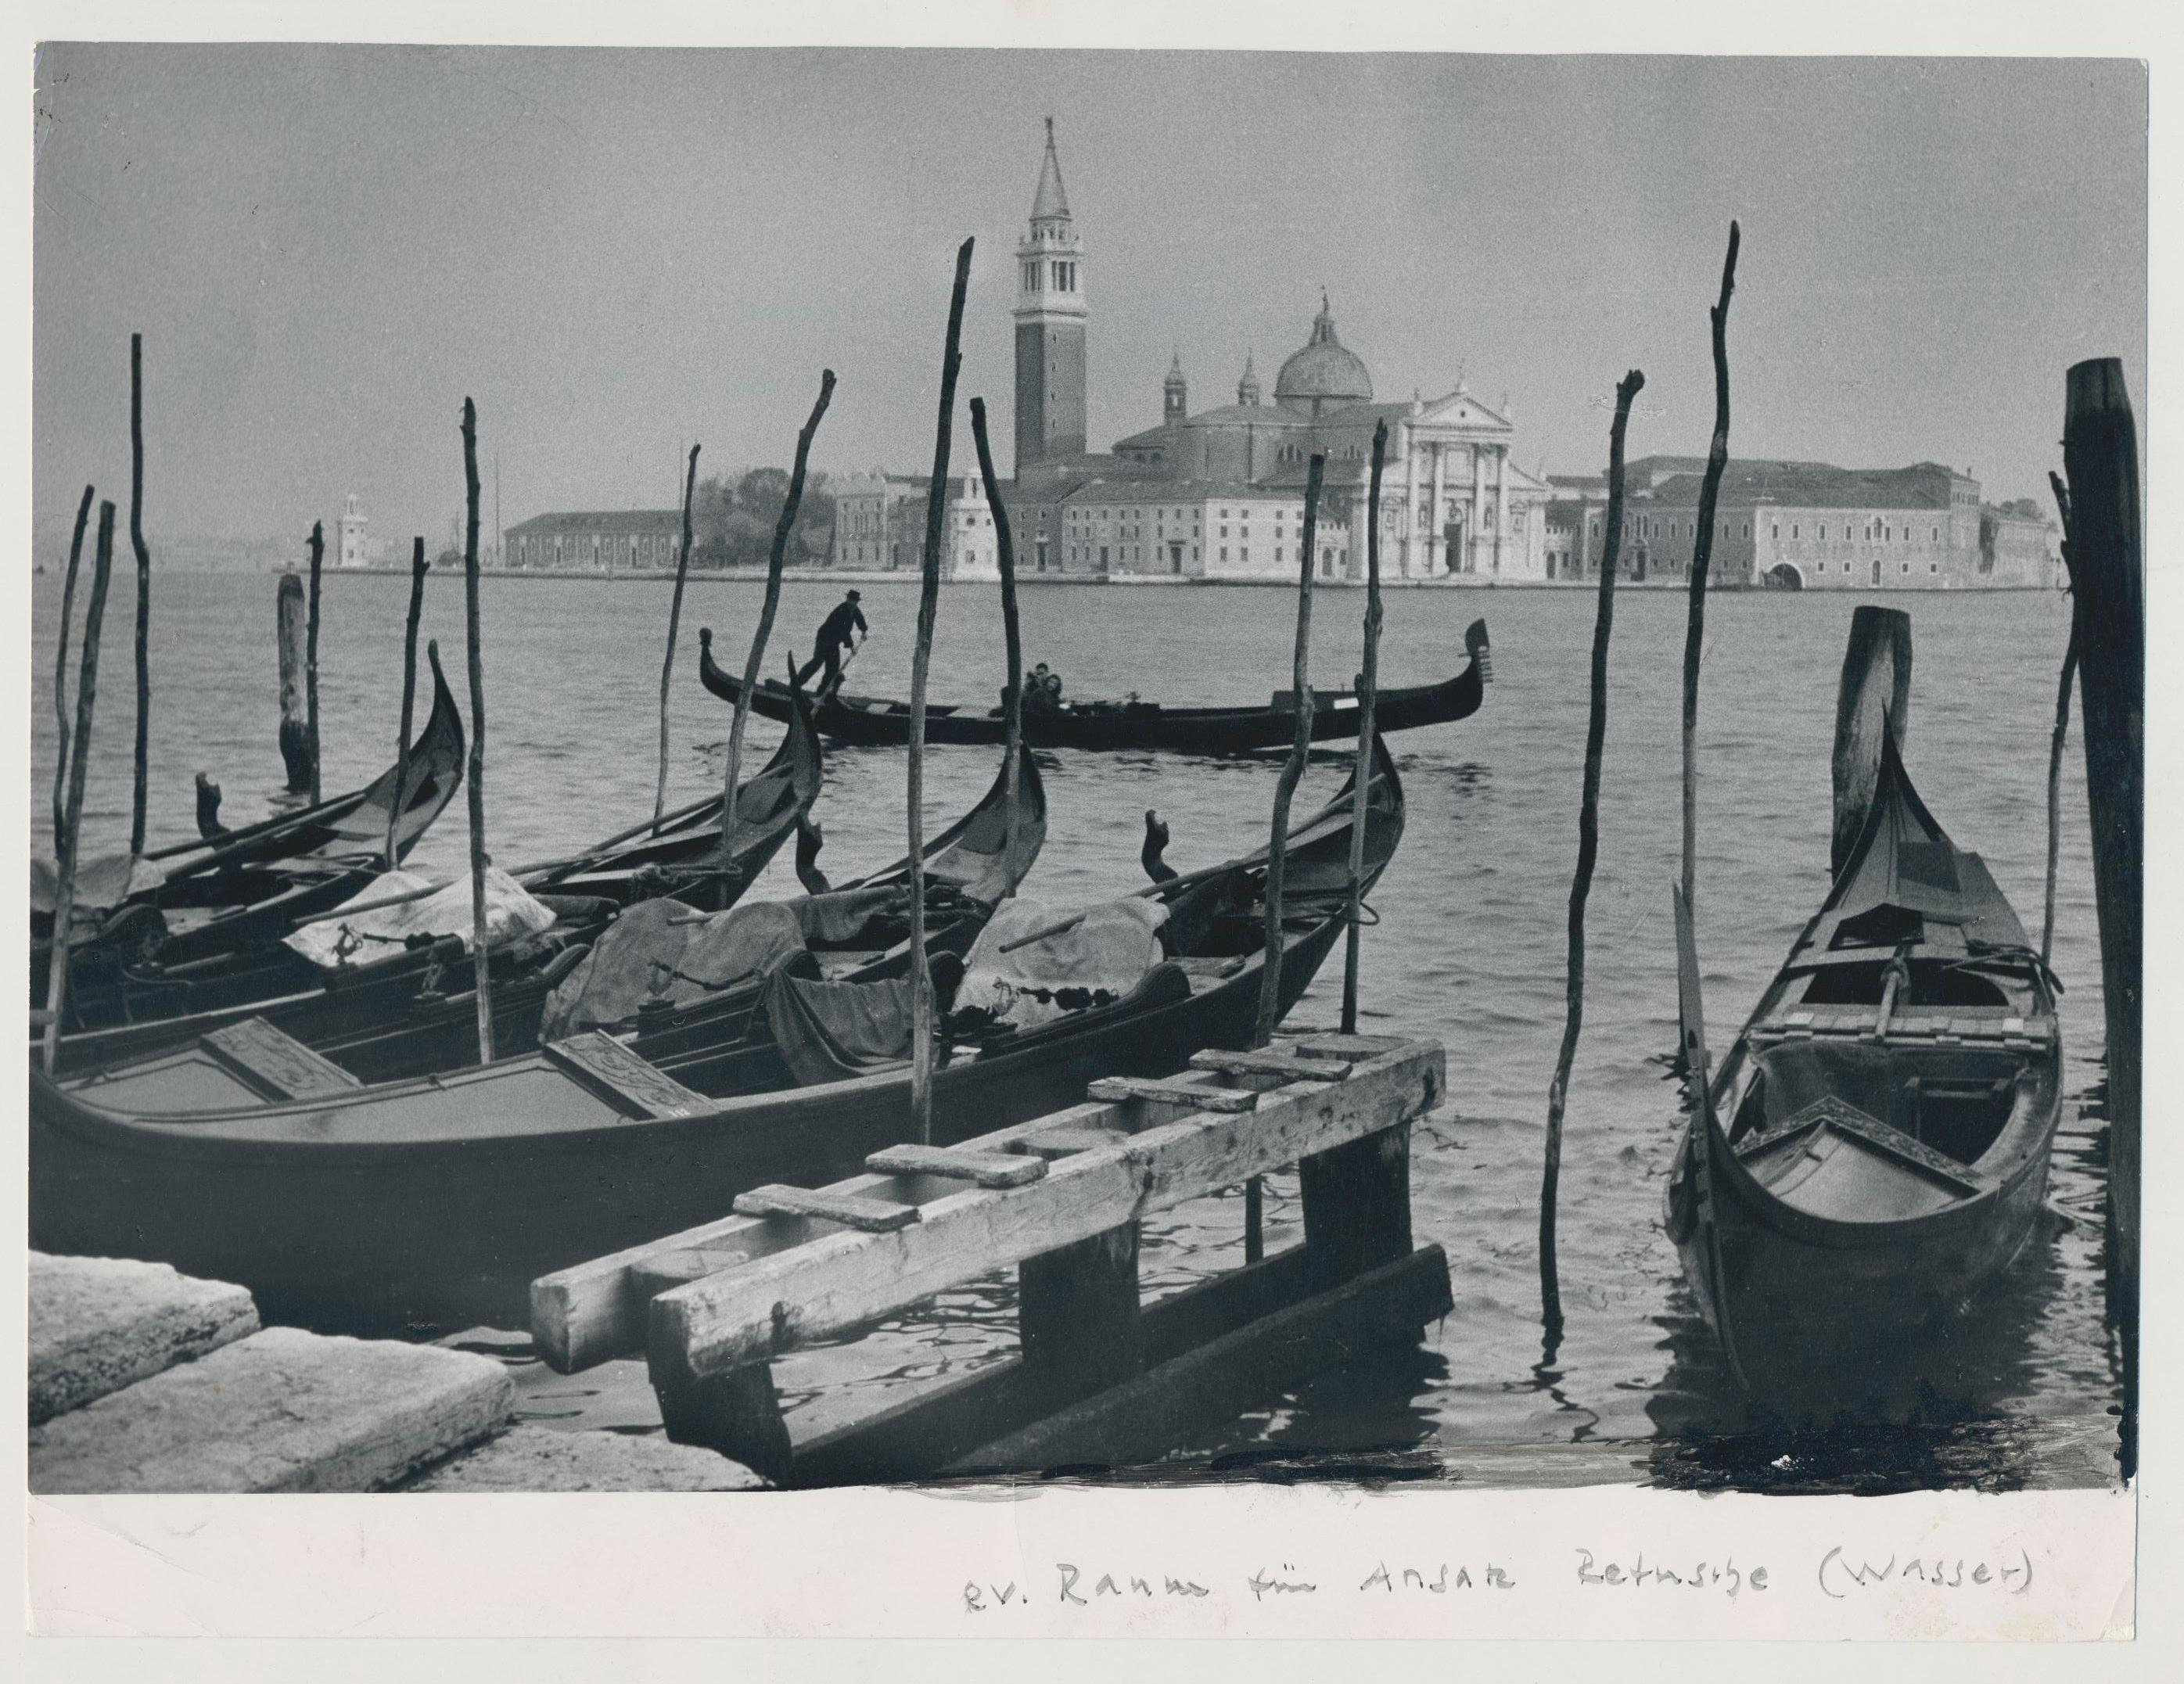 Erich Andres Black and White Photograph - Venice - Gondolas on Waterfront, Italy, 1950s, 17, 3 x 11, 5 cm